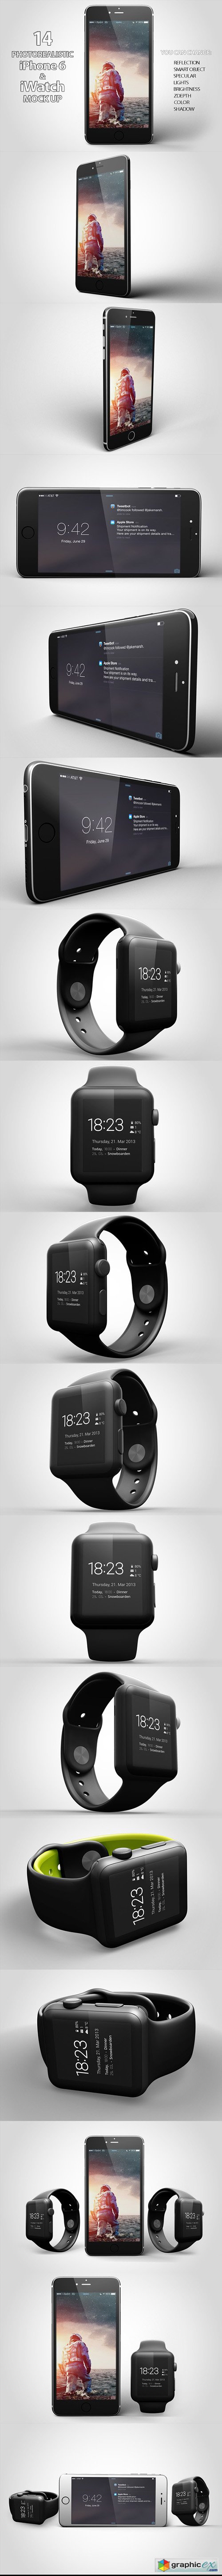 iPhone 6 & iWatch Mock Up